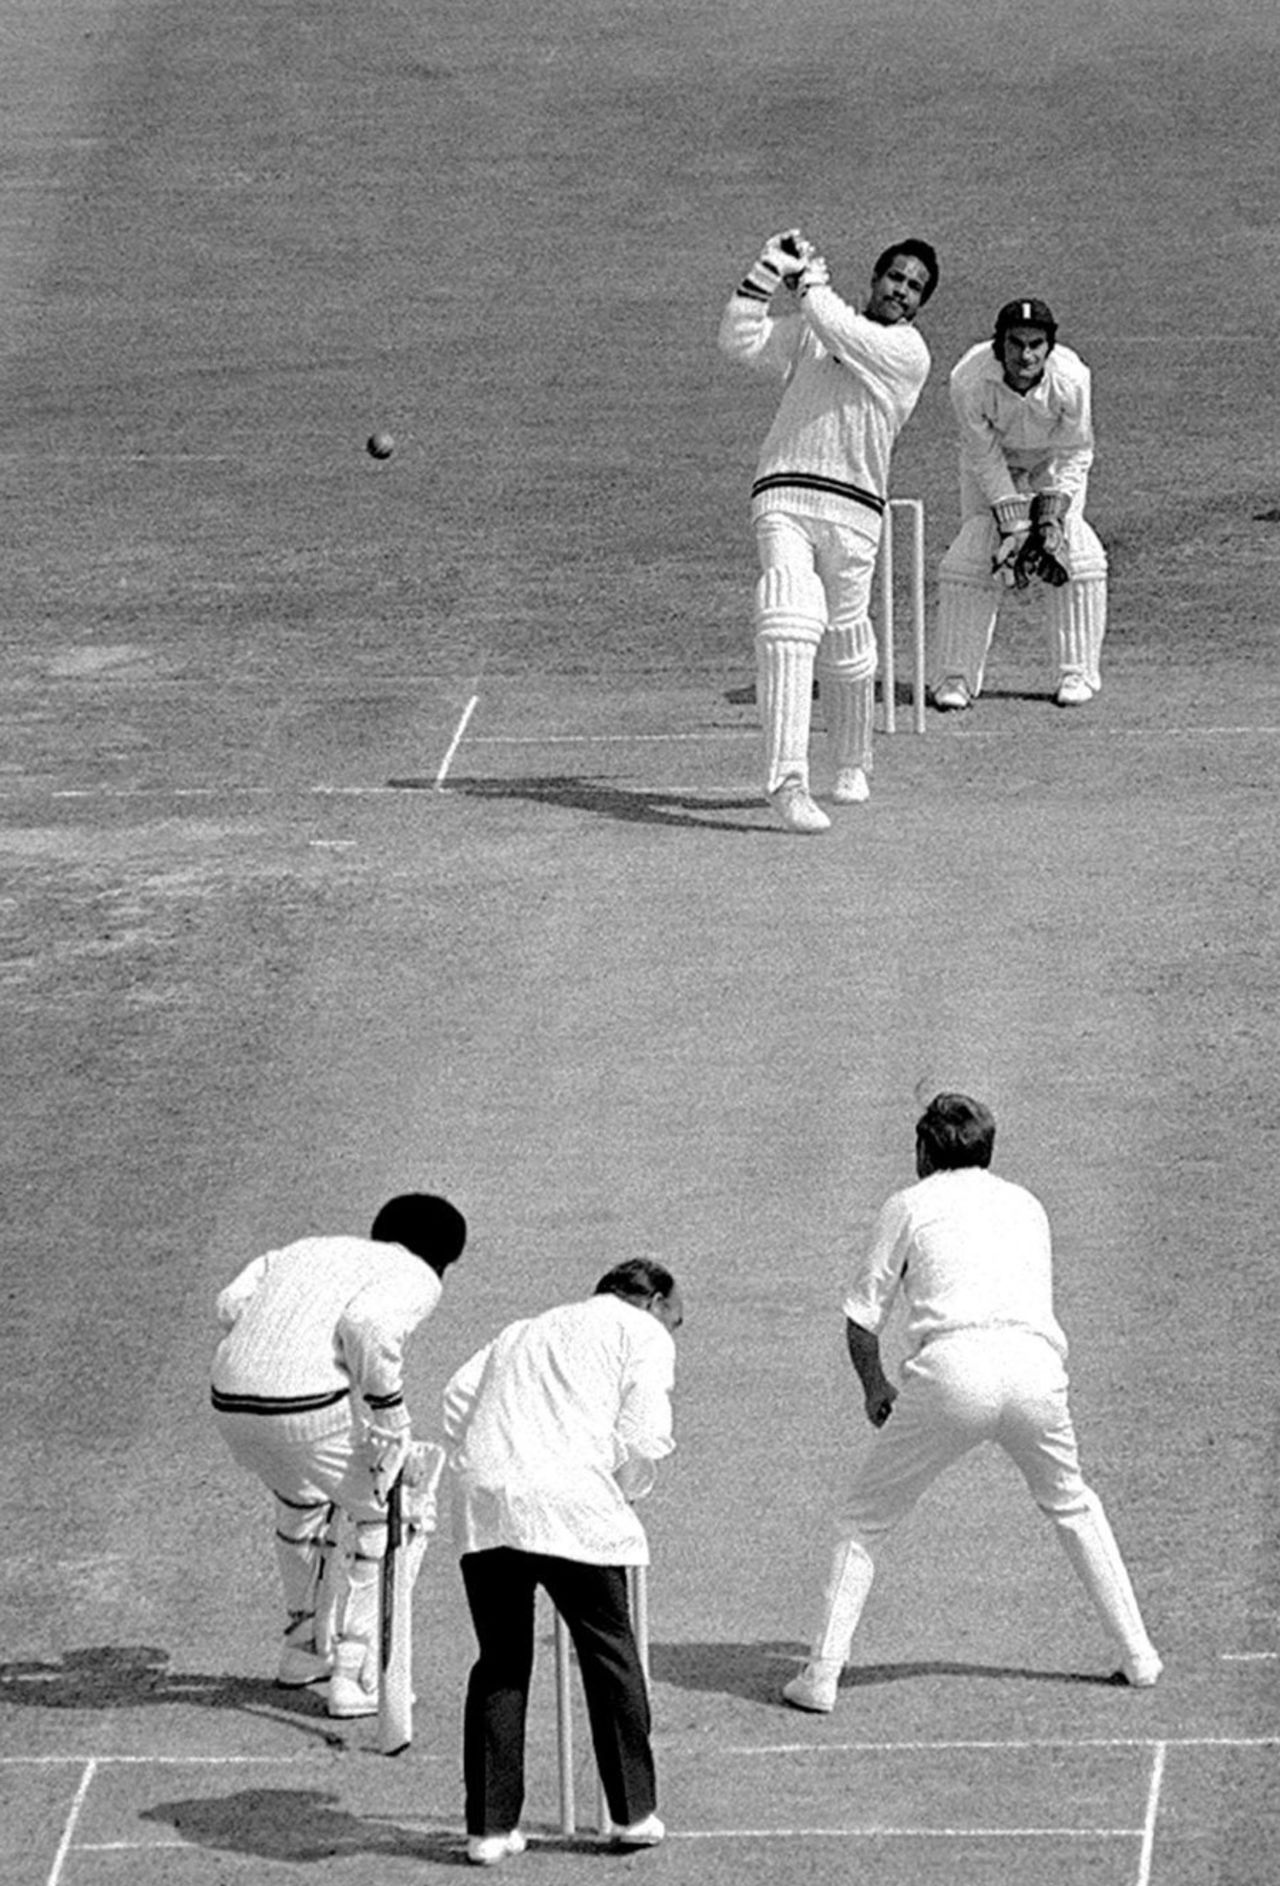 Garry Sobers on his way to 150*, his final Test hundred, England v West Indies, Lord's, August 24 1973